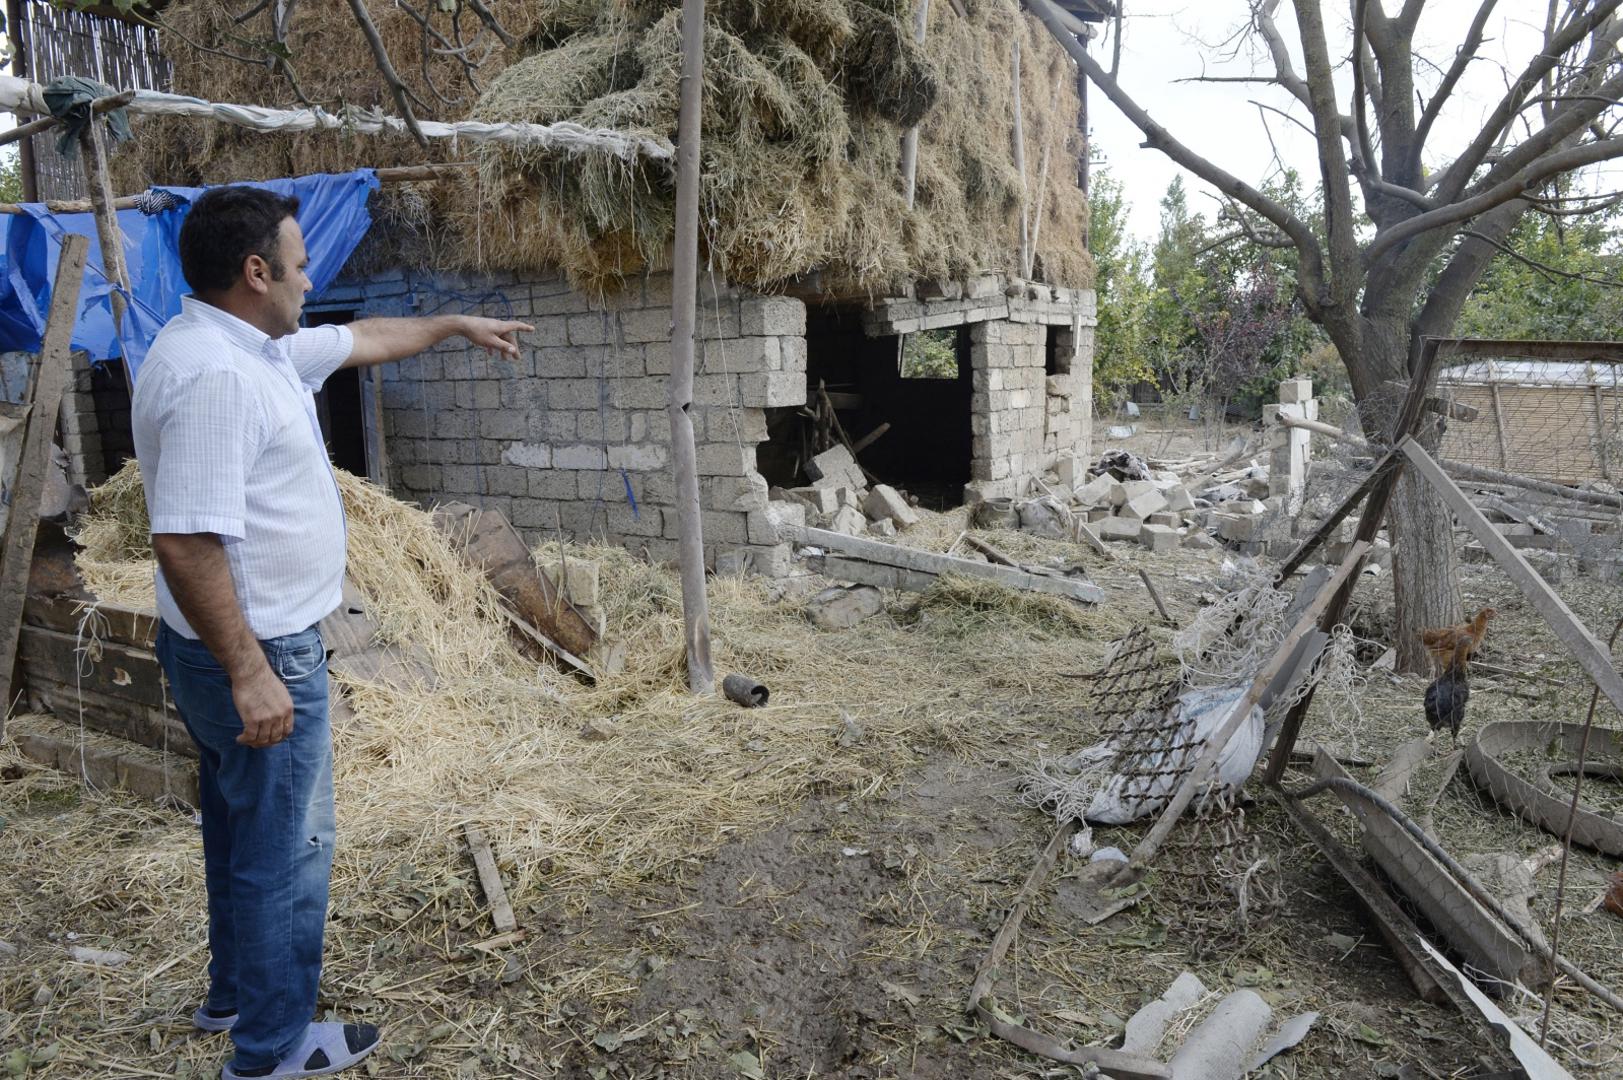 AZERBAIJAN-ARMENIA-CLASHES-CASUALTIES (201001) -- BAKU, Oct. 1, 2020 (Xinhua) -- A man shows a house damaged during the new round of Nagorno-Karabakh conflict between Azerbaijan and Armenia in Fuzuli district of Azerbaijan, Sept. 30, 2020.
  The new round of Nagorno-Karabakh conflict between Azerbaijan and Armenia Wednesday entered its 4th day, with more casualties revealed by the two sides. (Photo by Tofik Babayev/Xinhua) Tofik Babayev  Photo: XINHUA/PIXSELL